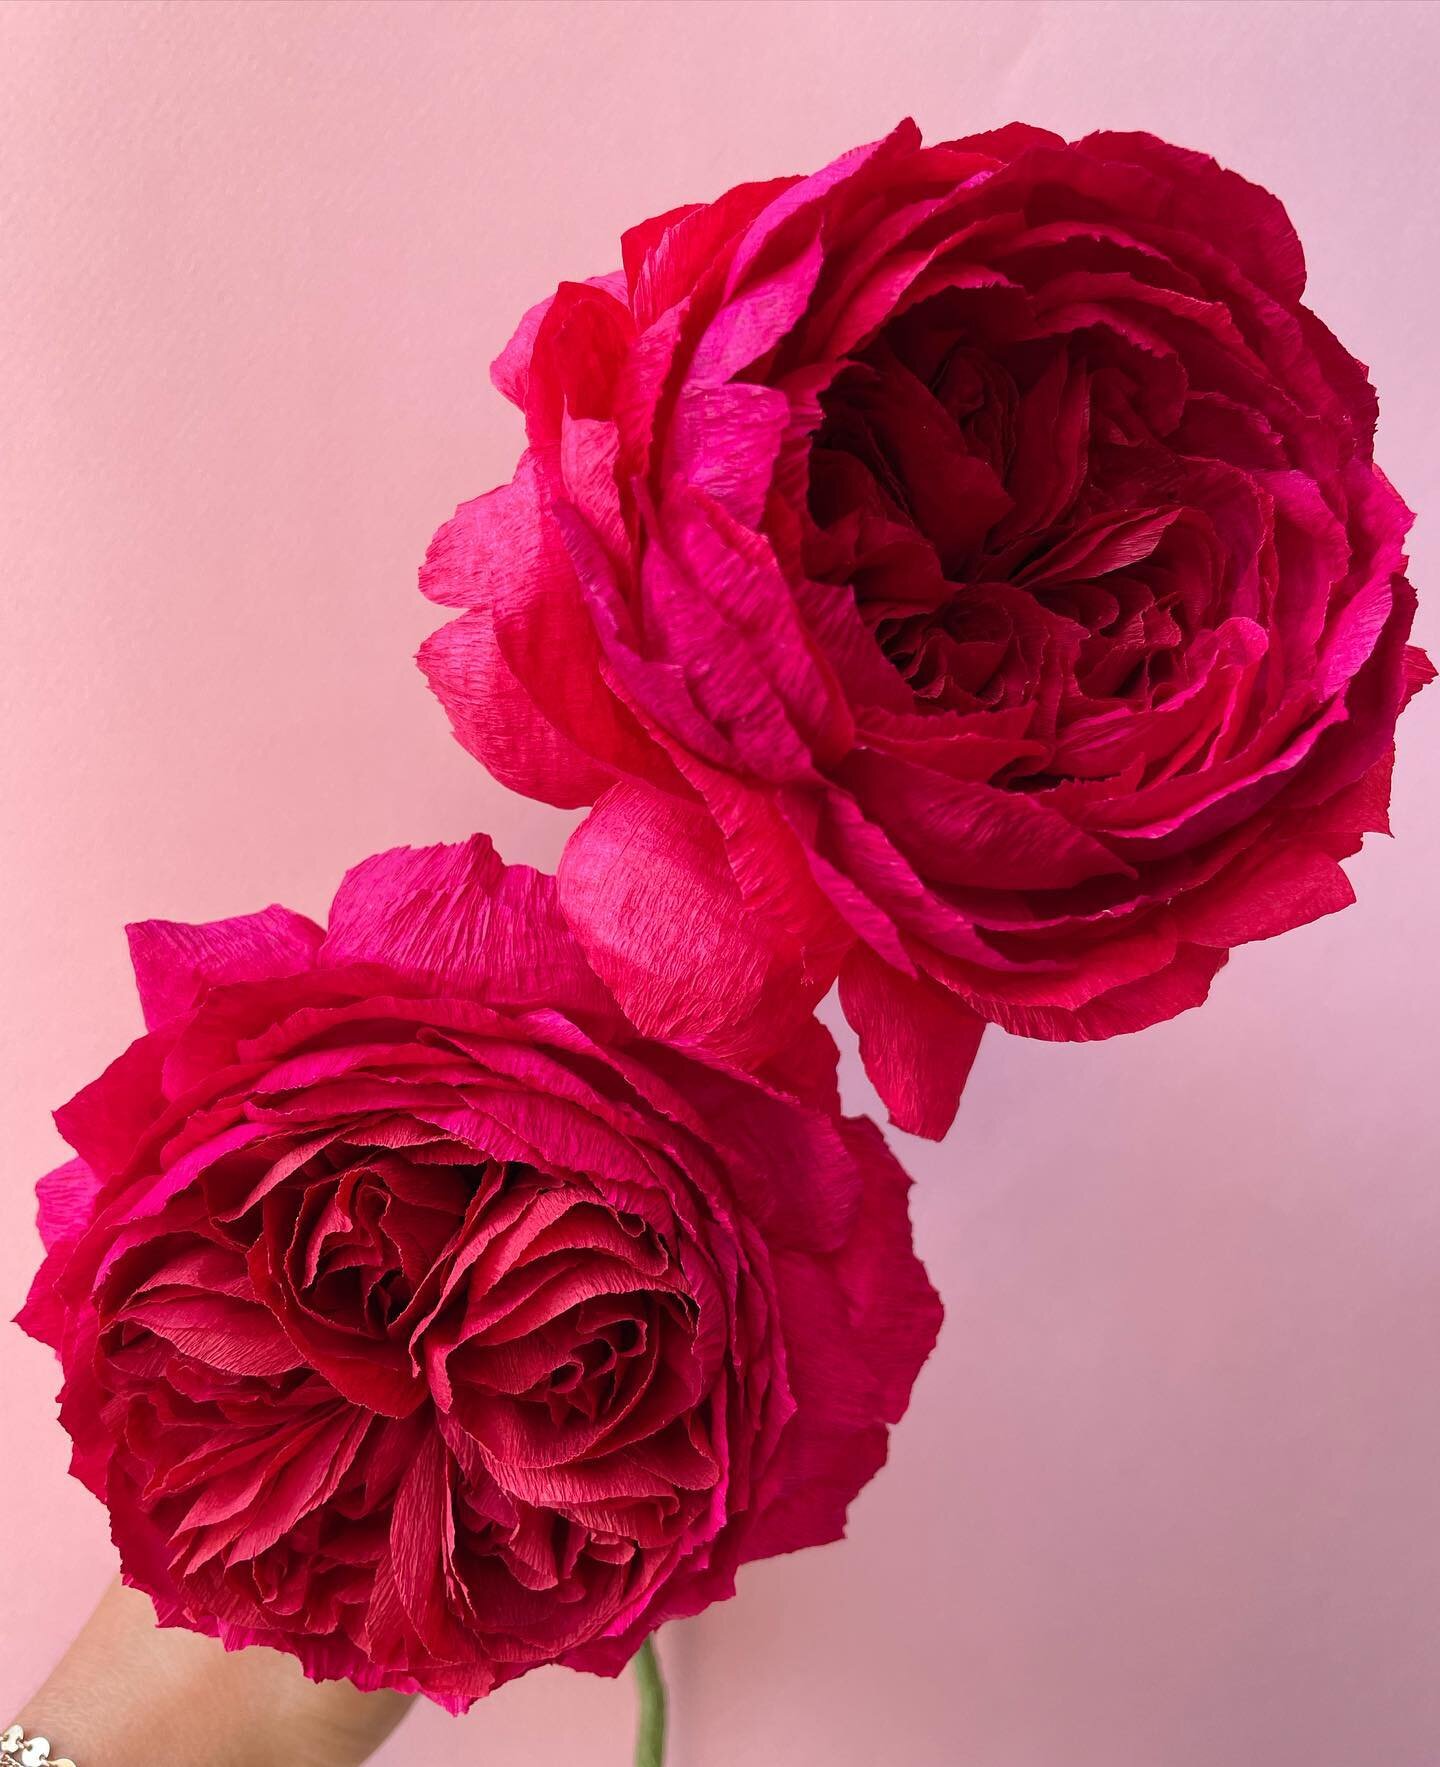 Paper Red Cabbage roses in different lighting. Swipe to see these shade shifters in action ❤️
.
I don&rsquo;t normally like working with red. I love wearing it 💄, my favorite foods are red 🍝, I even drive a red car 🚘, But making red flowers has al